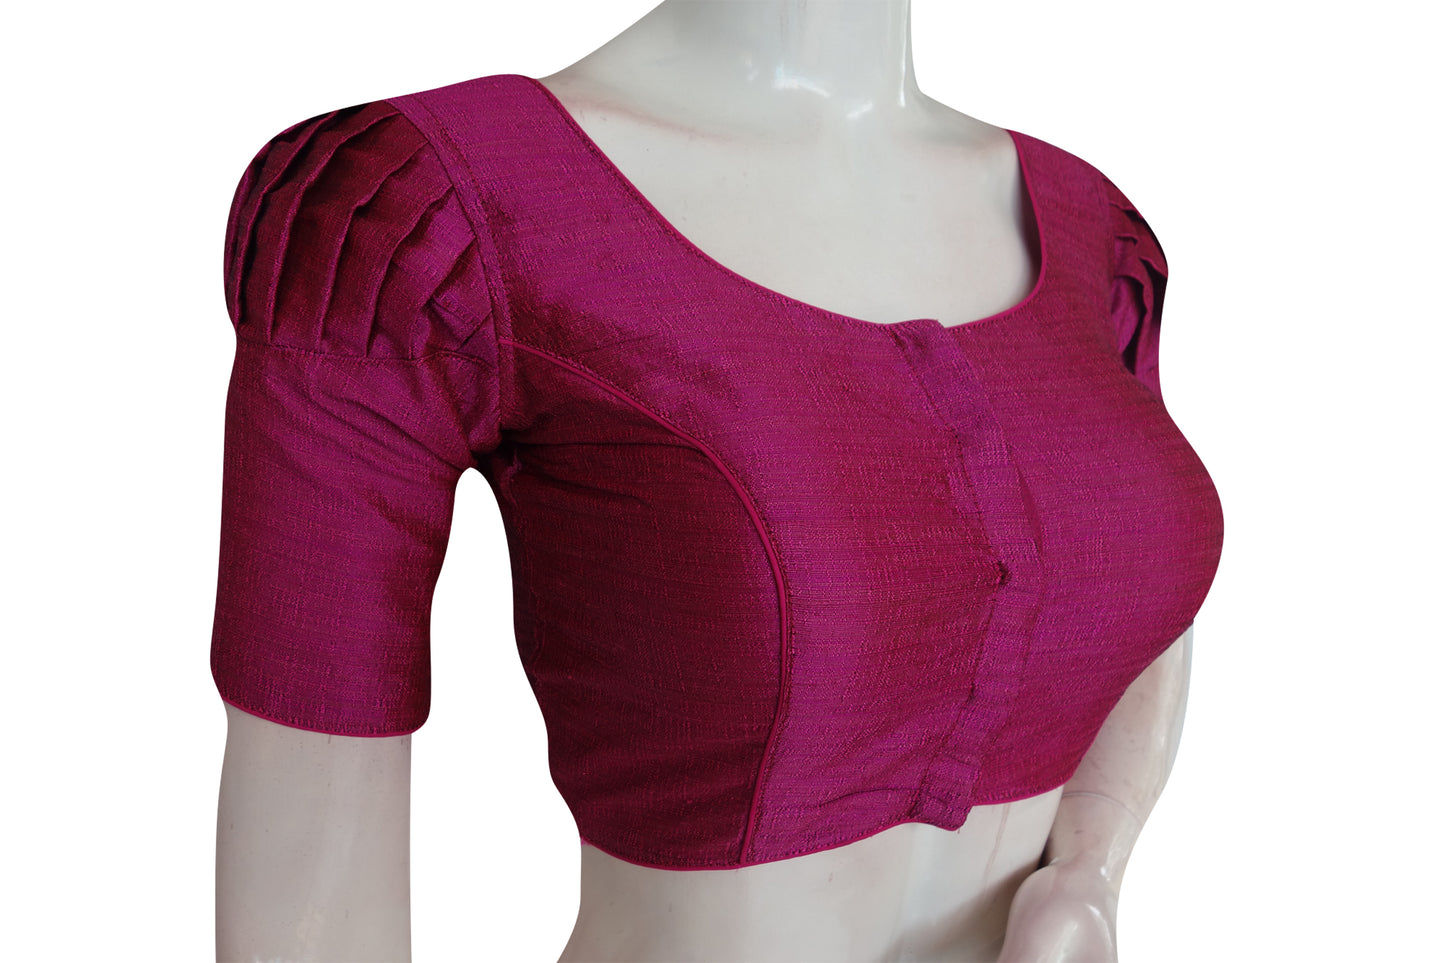 Magenta Color Plain Puff Sleeve Readymade Blouse with Face Mask